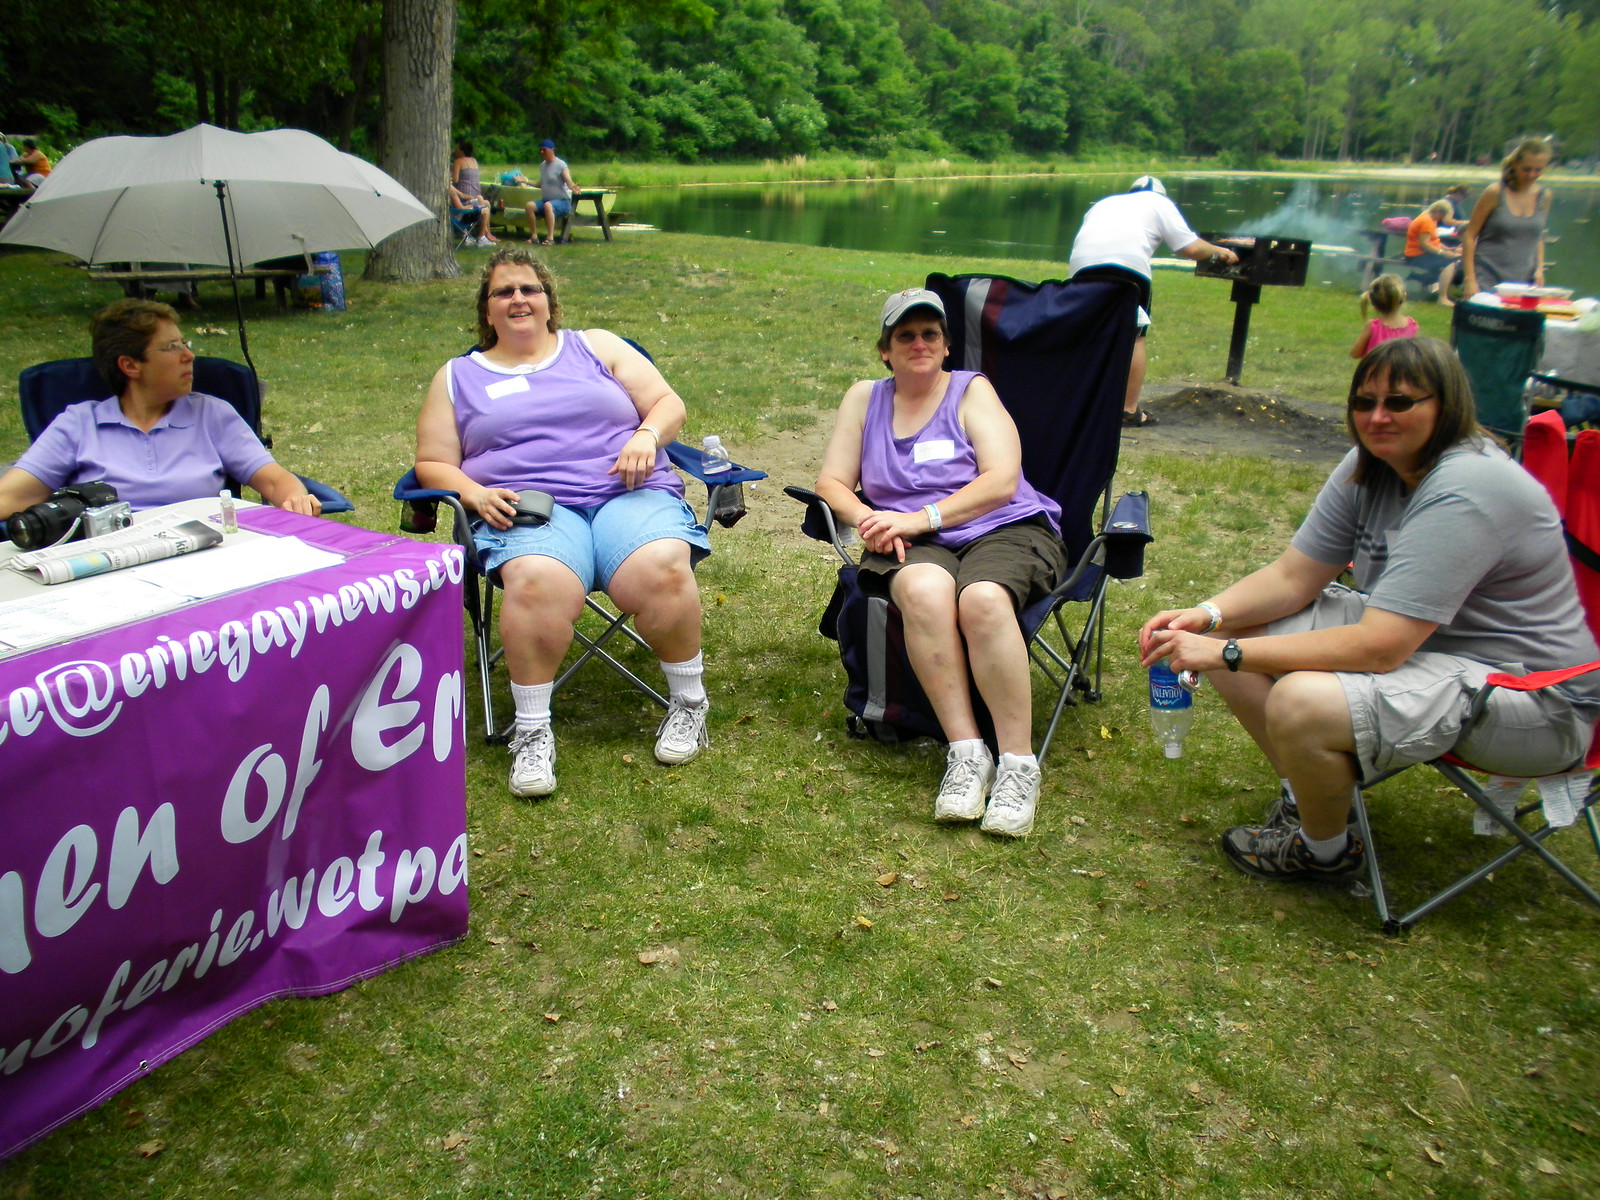 Dee, Kim, Andrea and Terry at the LBT Women info table. Photo by Deb Spilko.